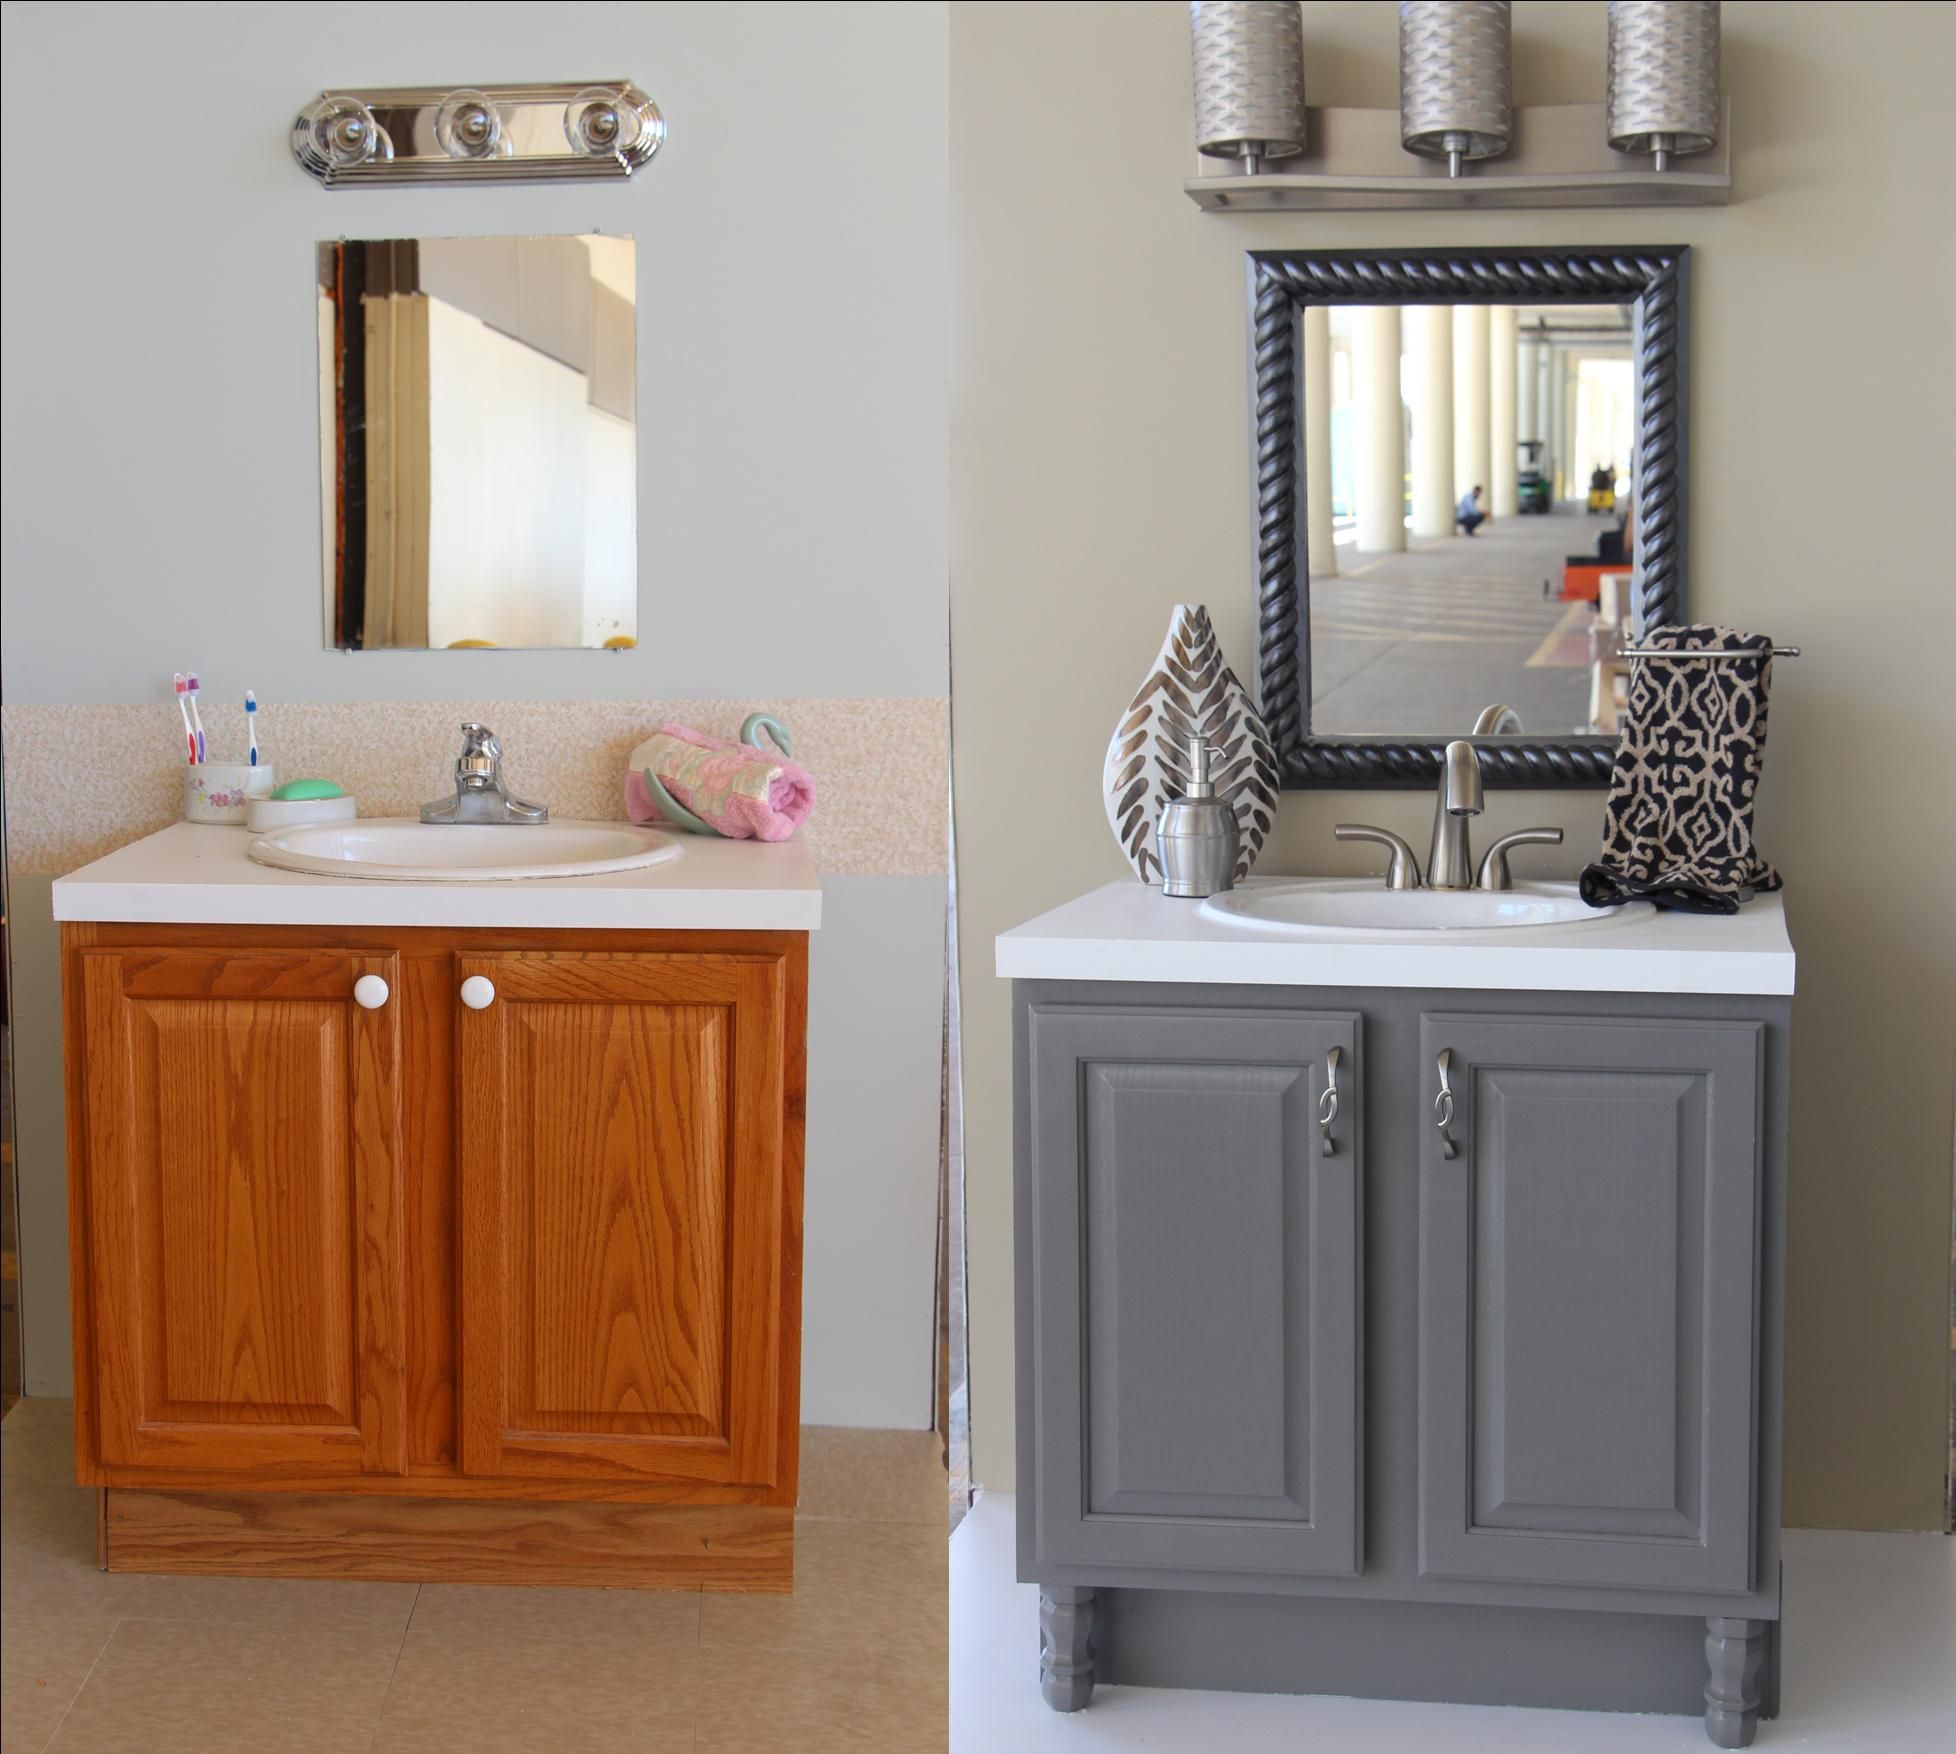 Bathroom Updates You Can Do This Weekend!